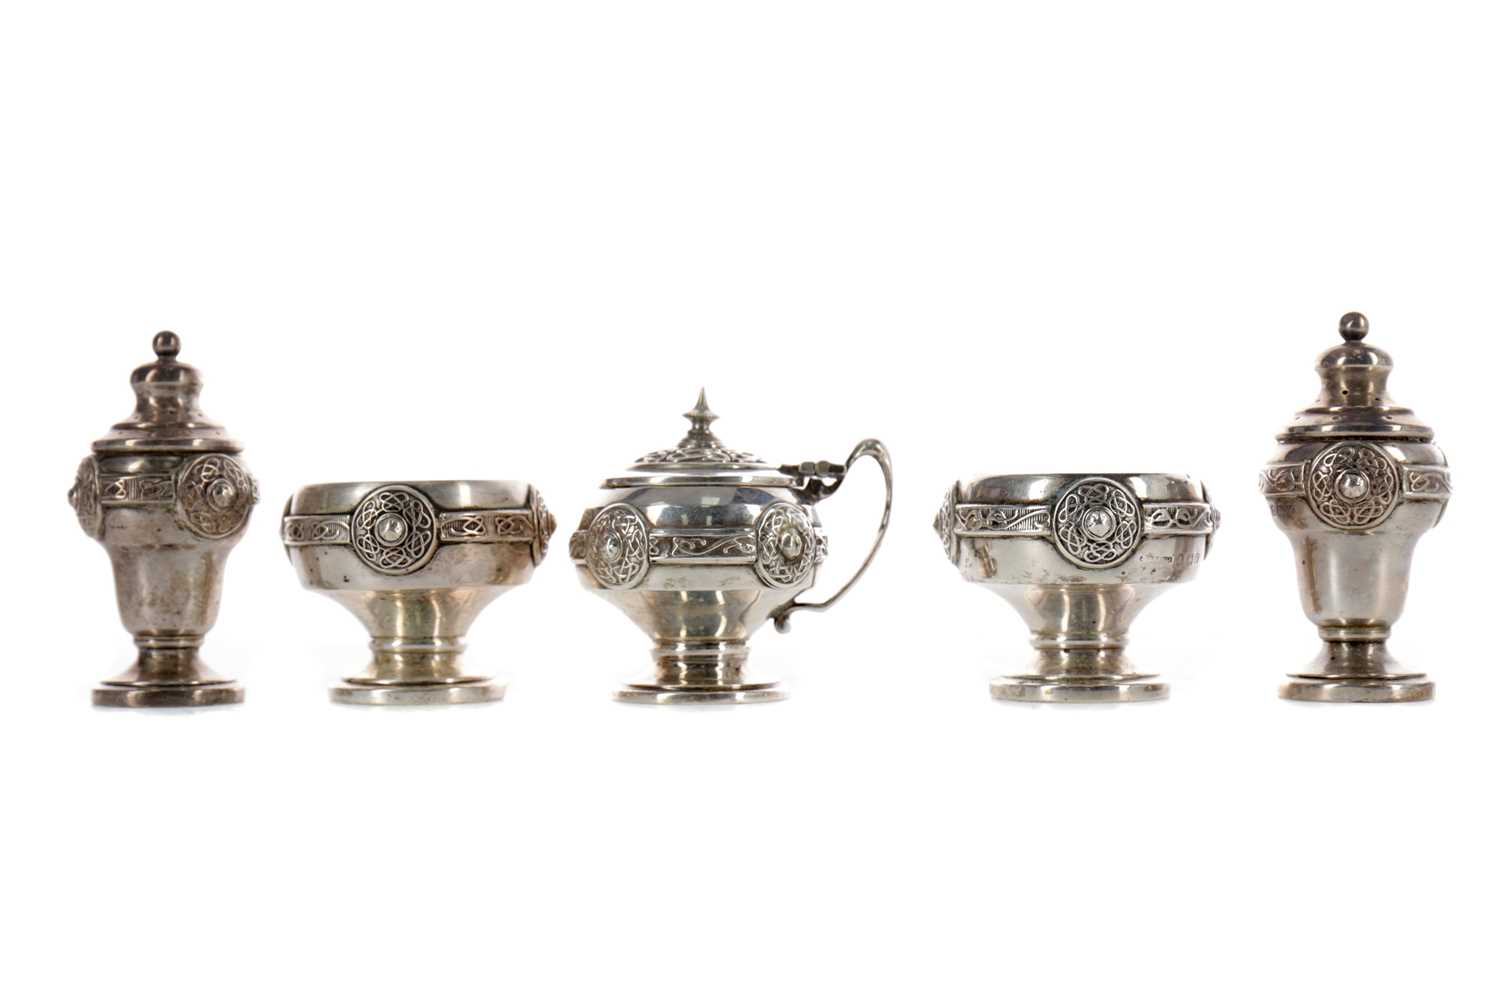 Lot 425 - A GEORGE V SILVER CRUET SET, ALONG WITH ANOTHER